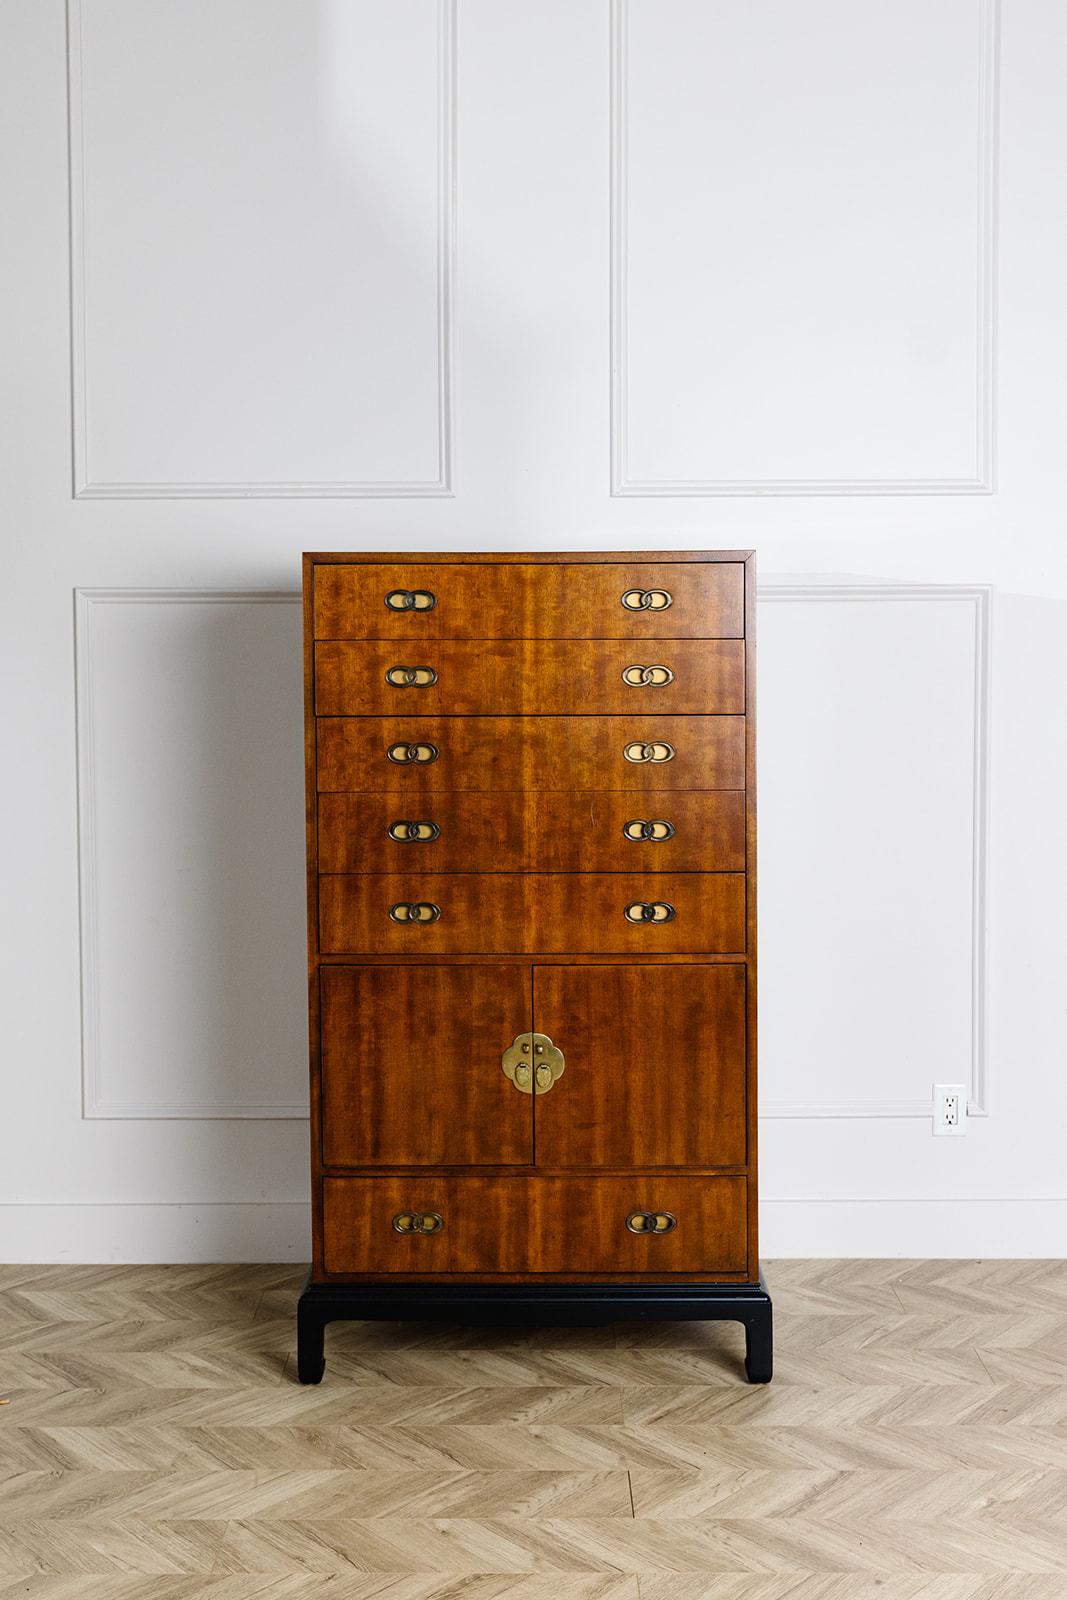 This vintage mahogany campaign style armoire by Henredon has been professionally refinished with a new satin clear coat. Built from a stunning flame mahogany, it features 6 drawers and 1 cabinet with vertical wood organizers in place. The beautiful